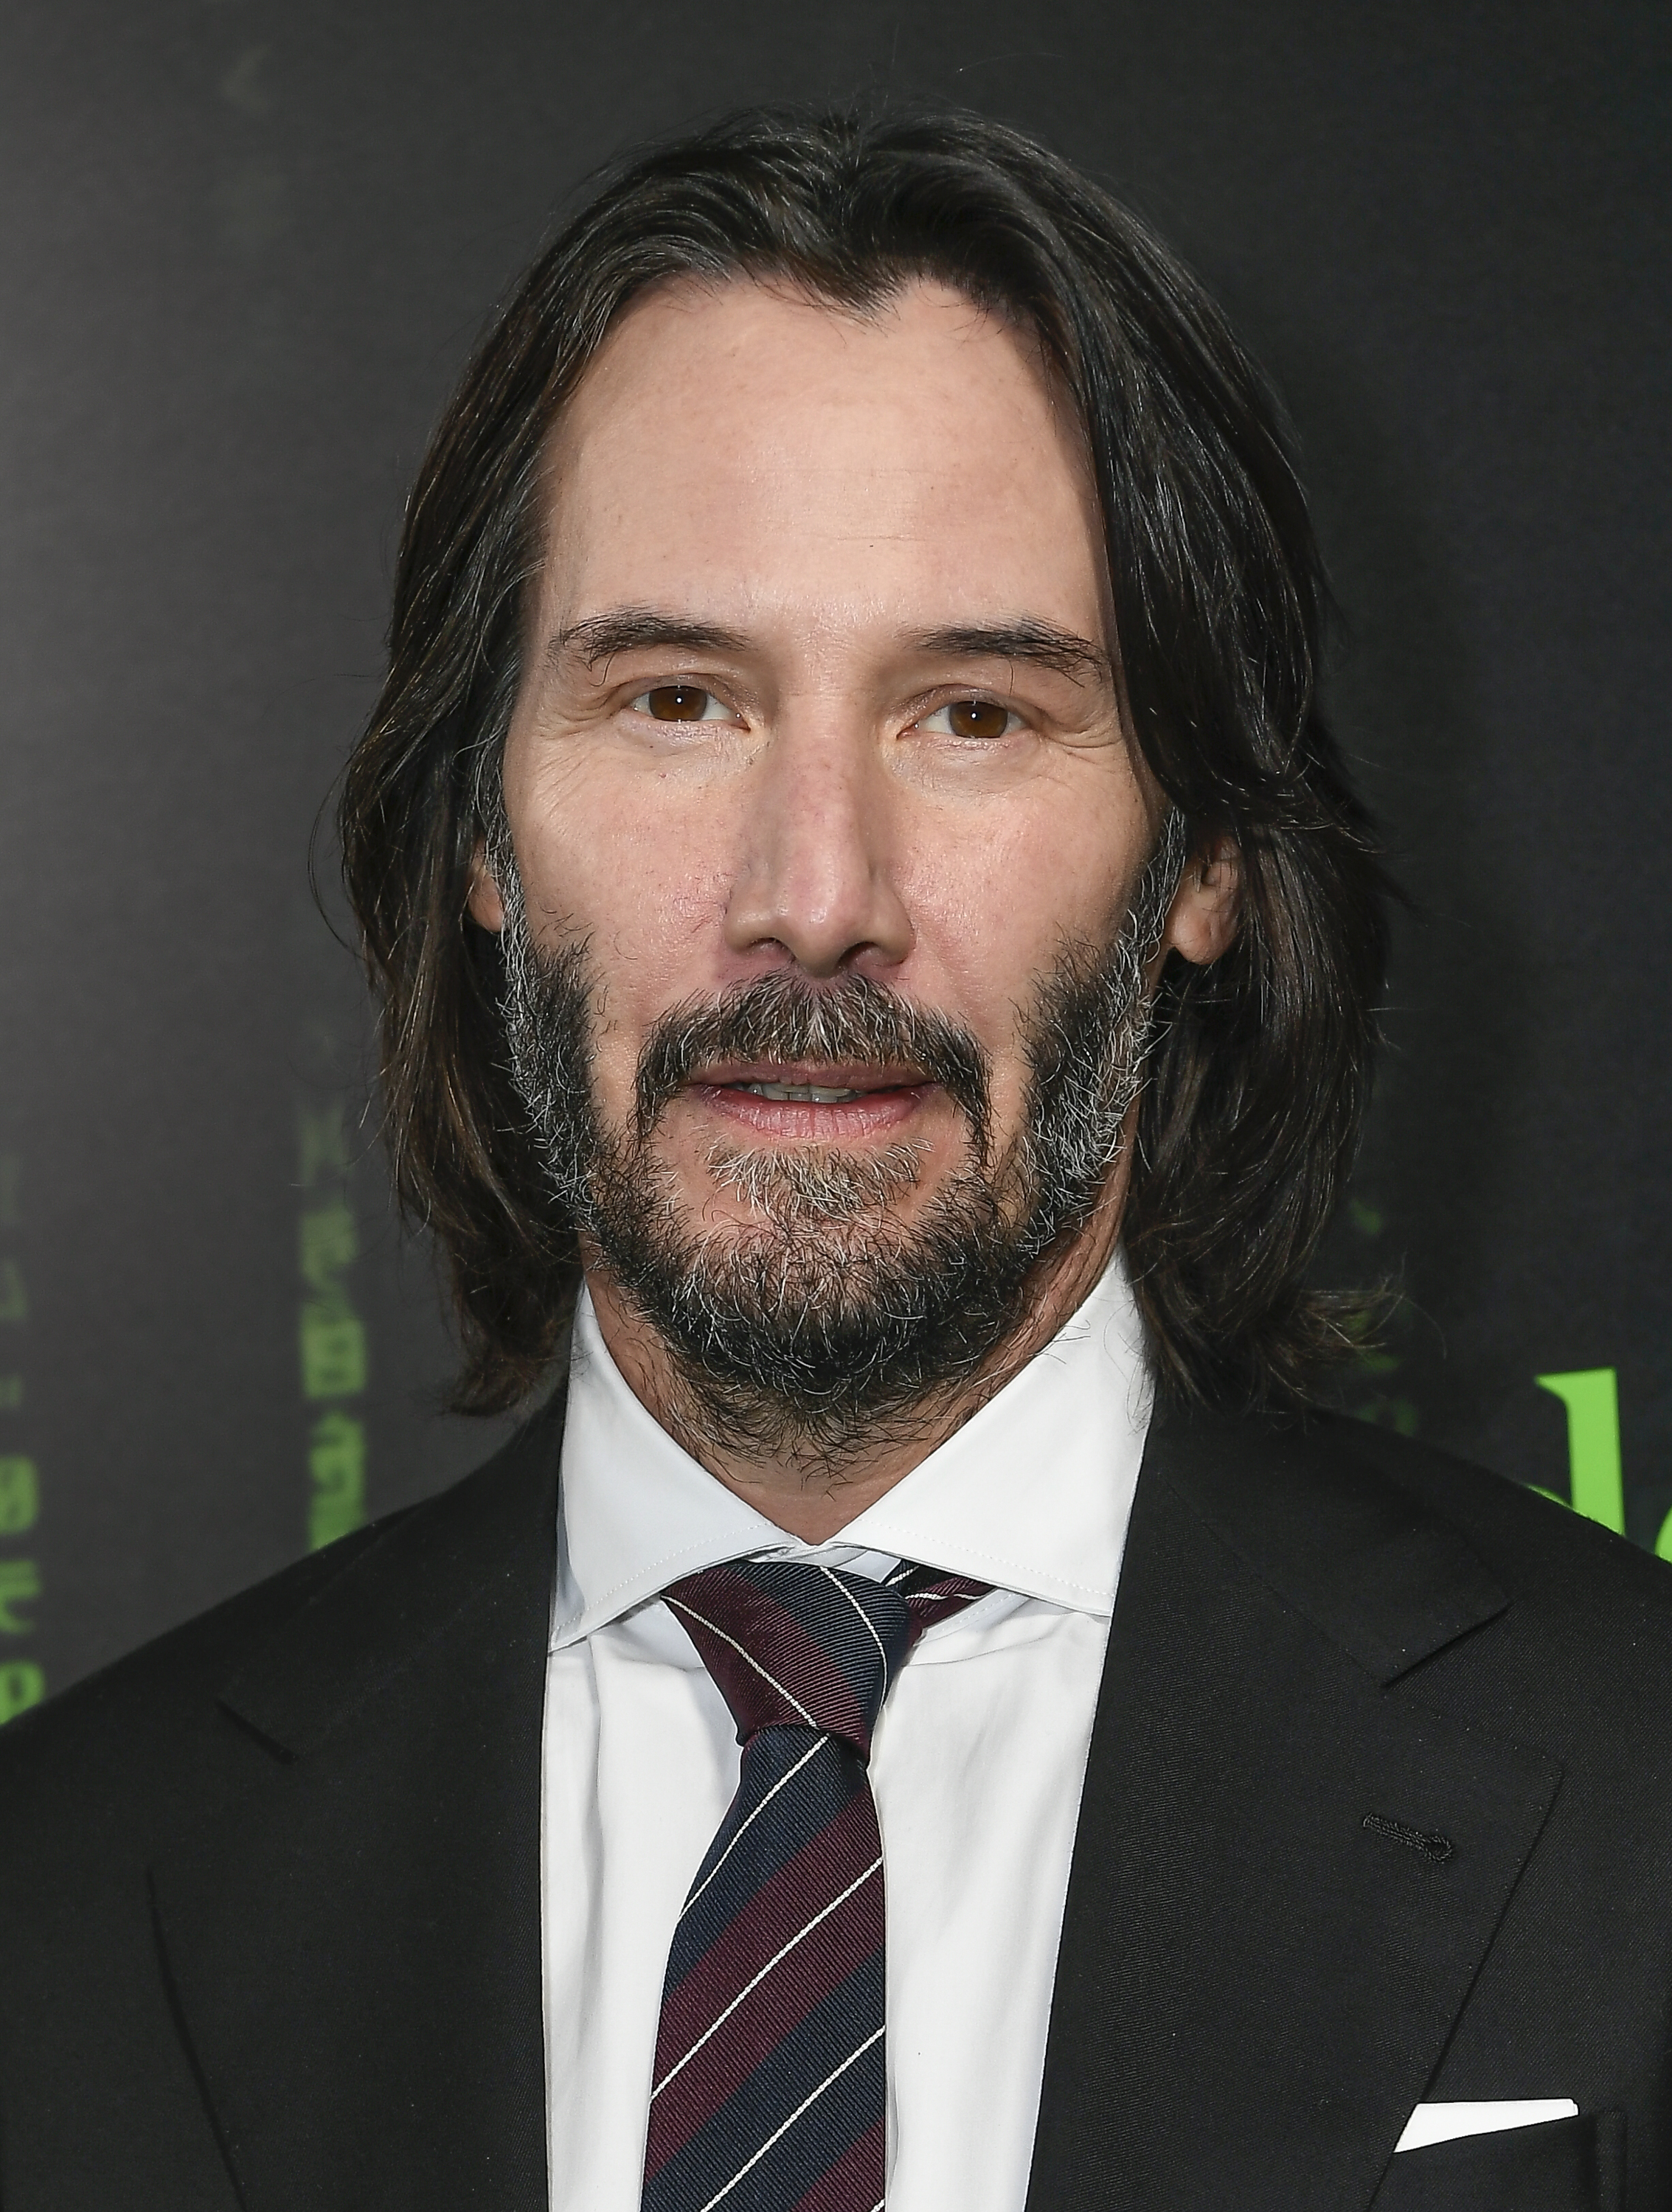 Keanu Reeves at The Castro Theatre on December 18, 2021 in San Francisco, California. | Source: Getty Images